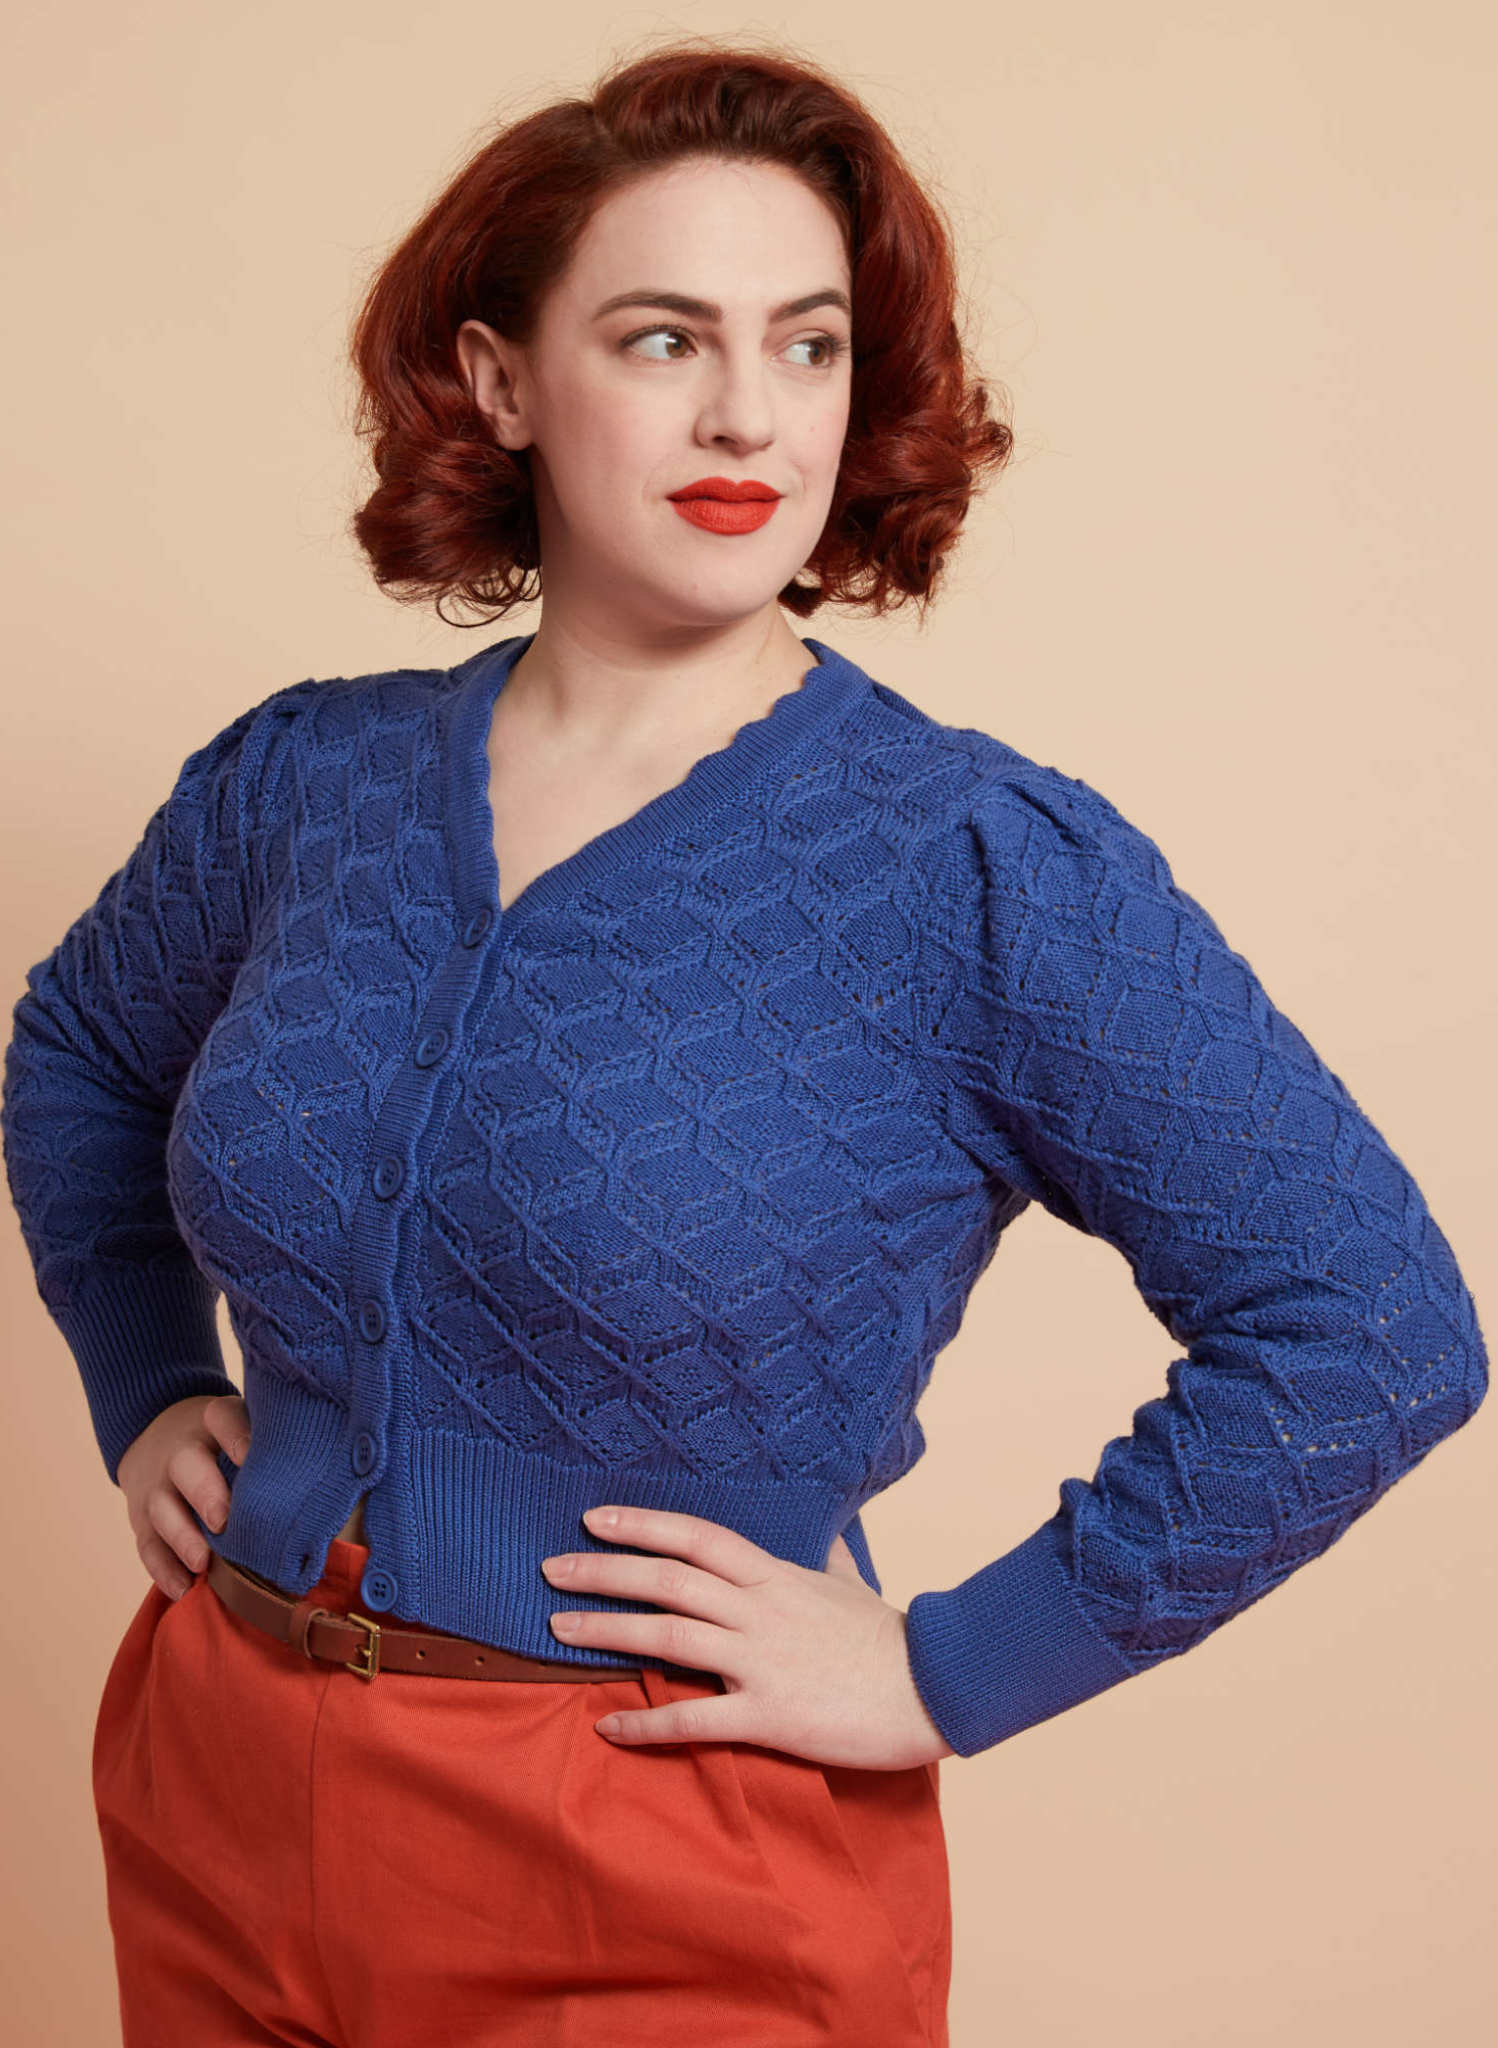 Woman wearing blue 1940s style cardigan with long sleeves and v neck